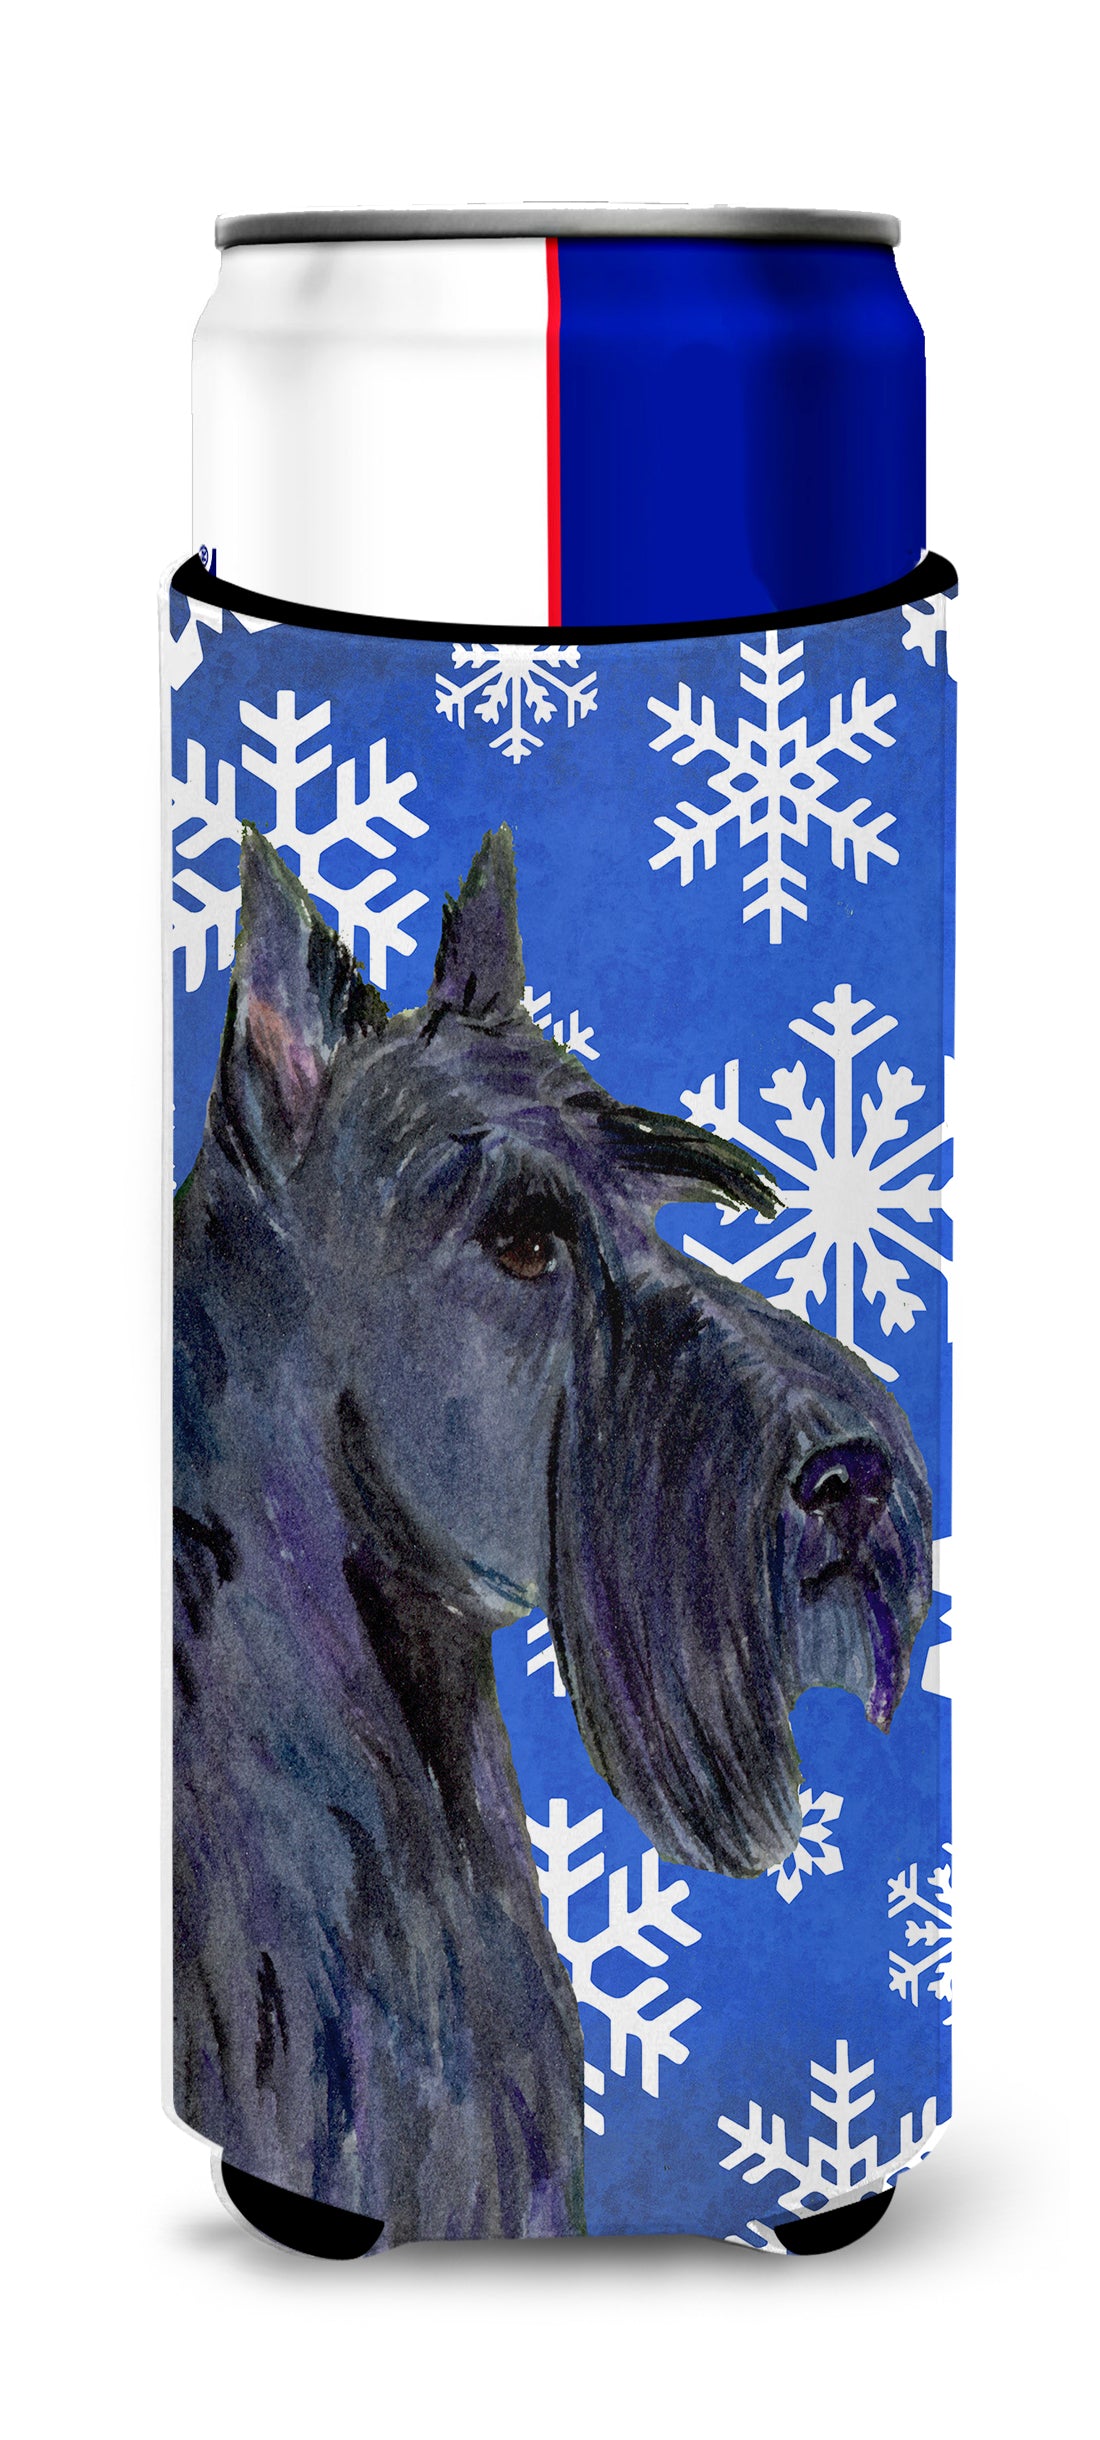 Scottish Terrier Winter Snowflakes Holiday Ultra Beverage Insulators for slim cans SS4667MUK